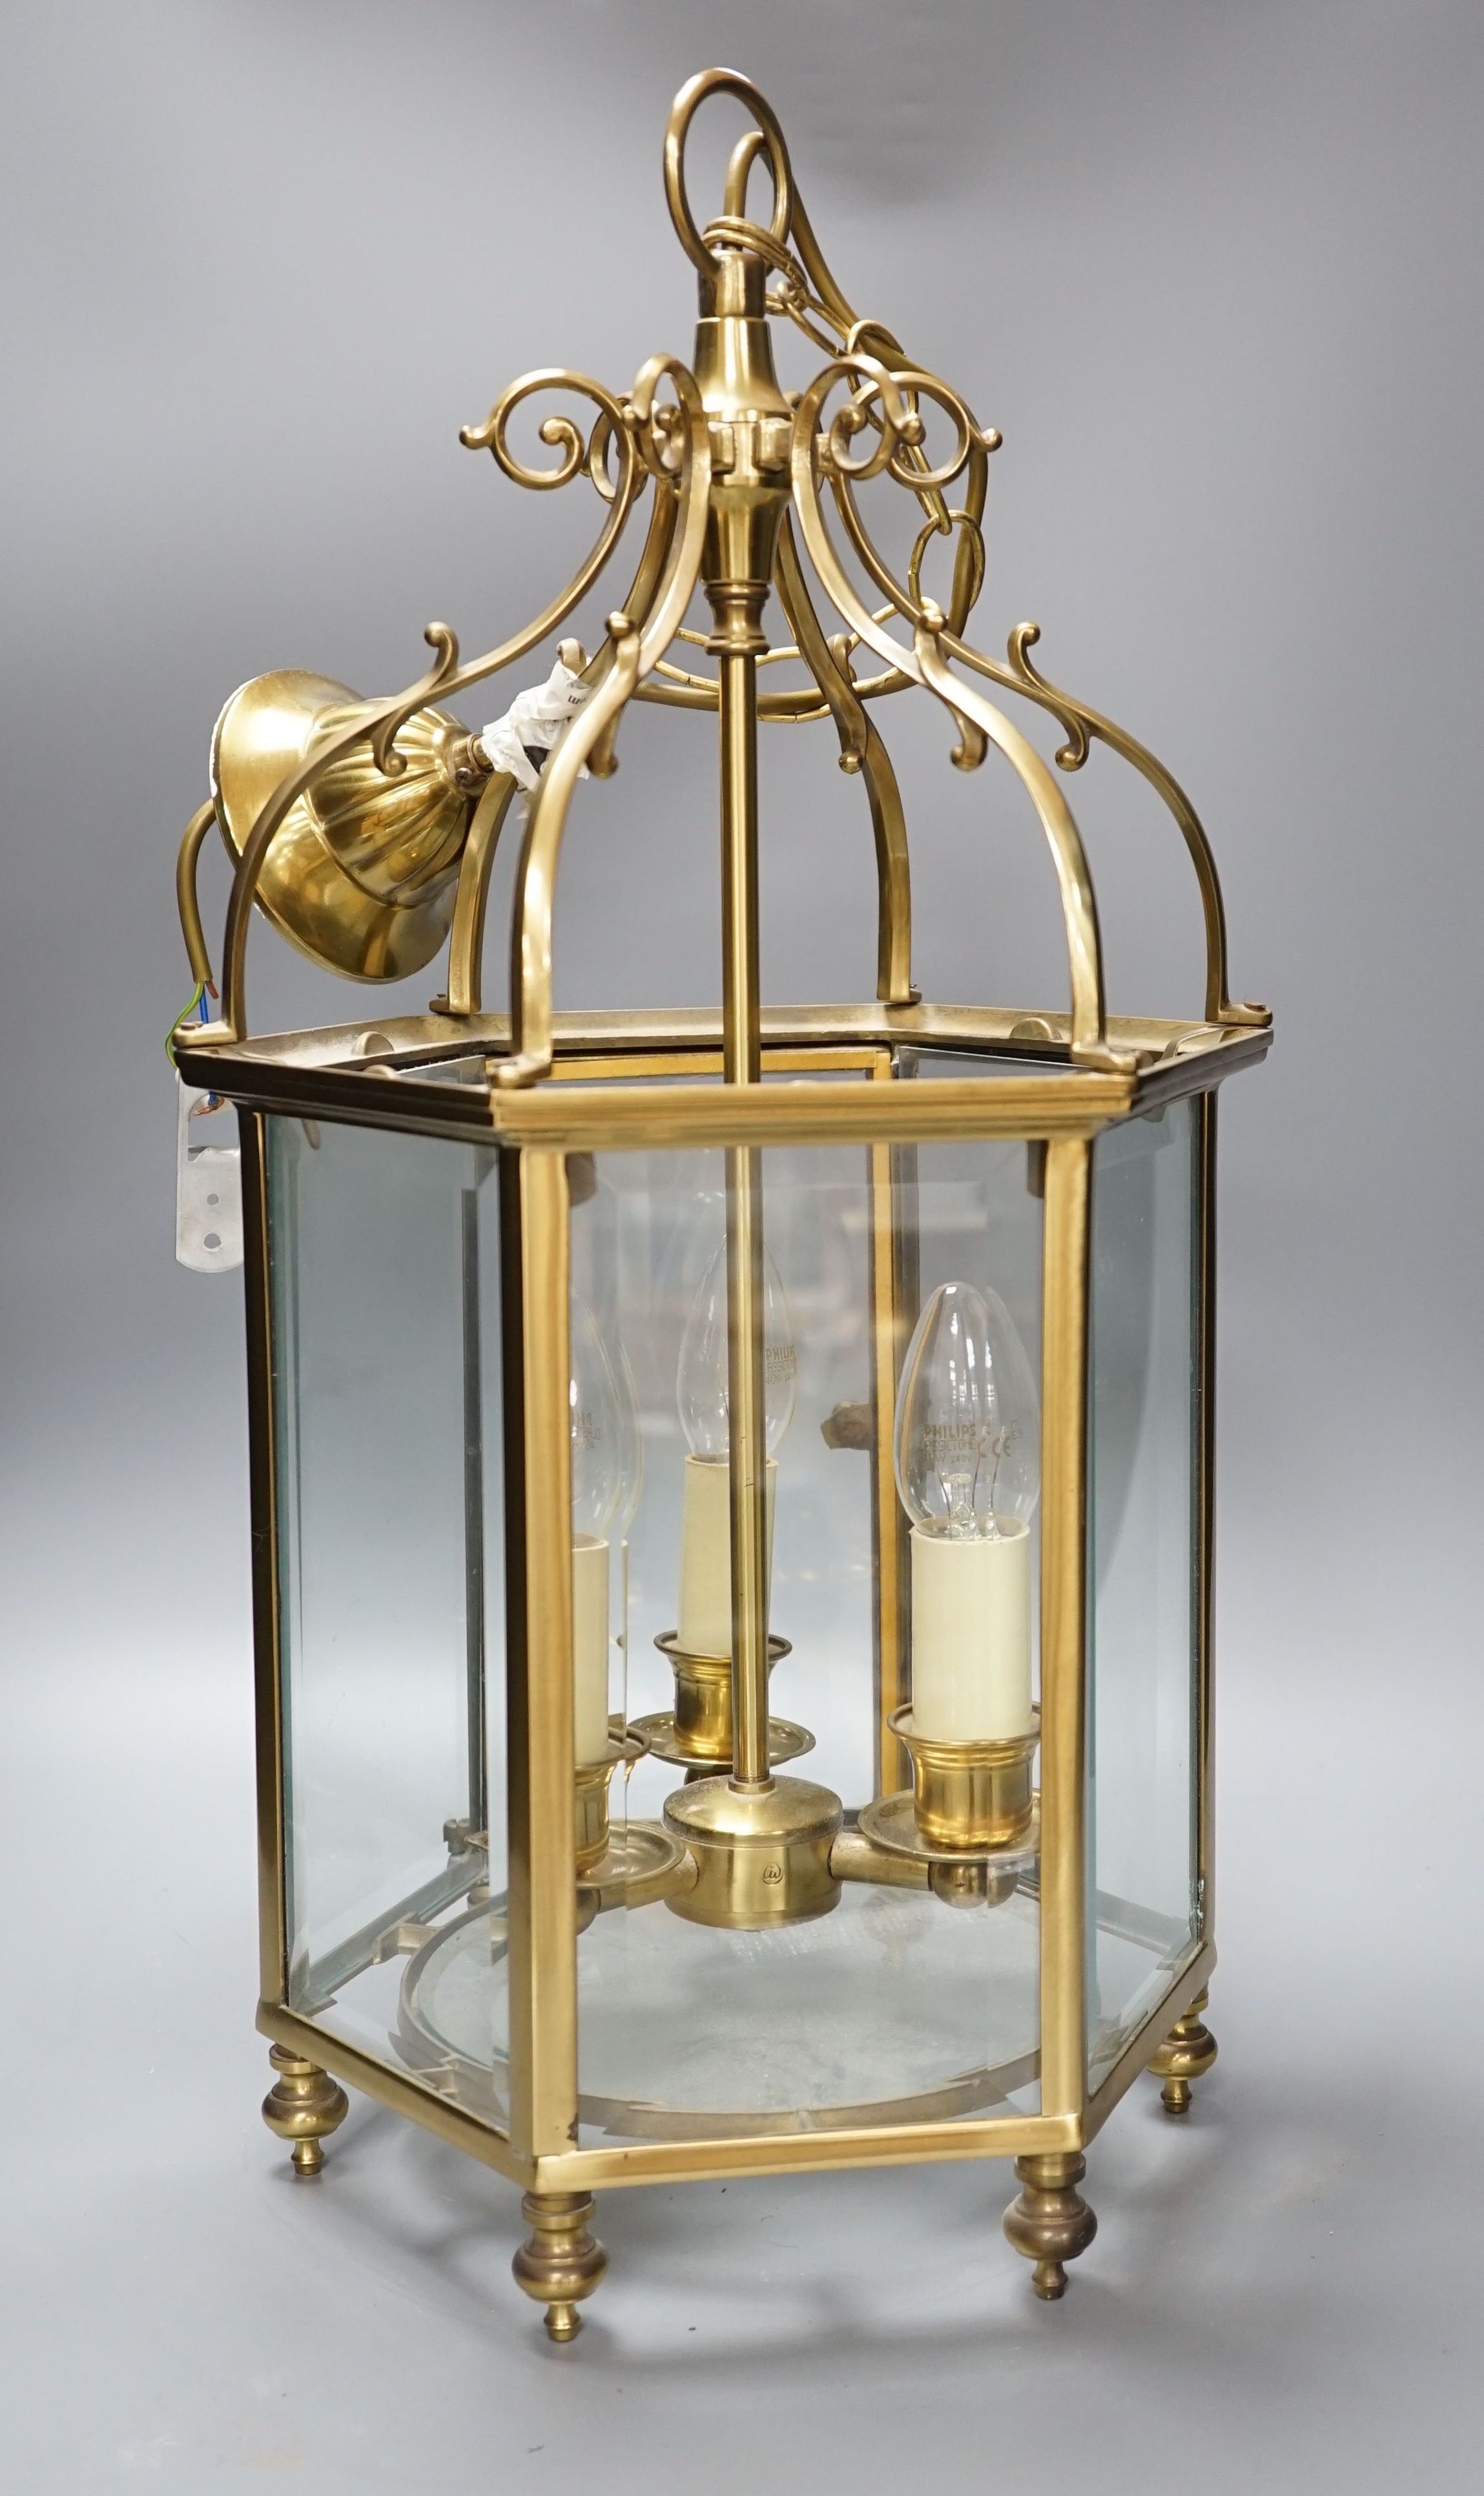 A three light brass hall lantern in hexagonal glass opening case - 56cm high excluding ceiling rose suspension